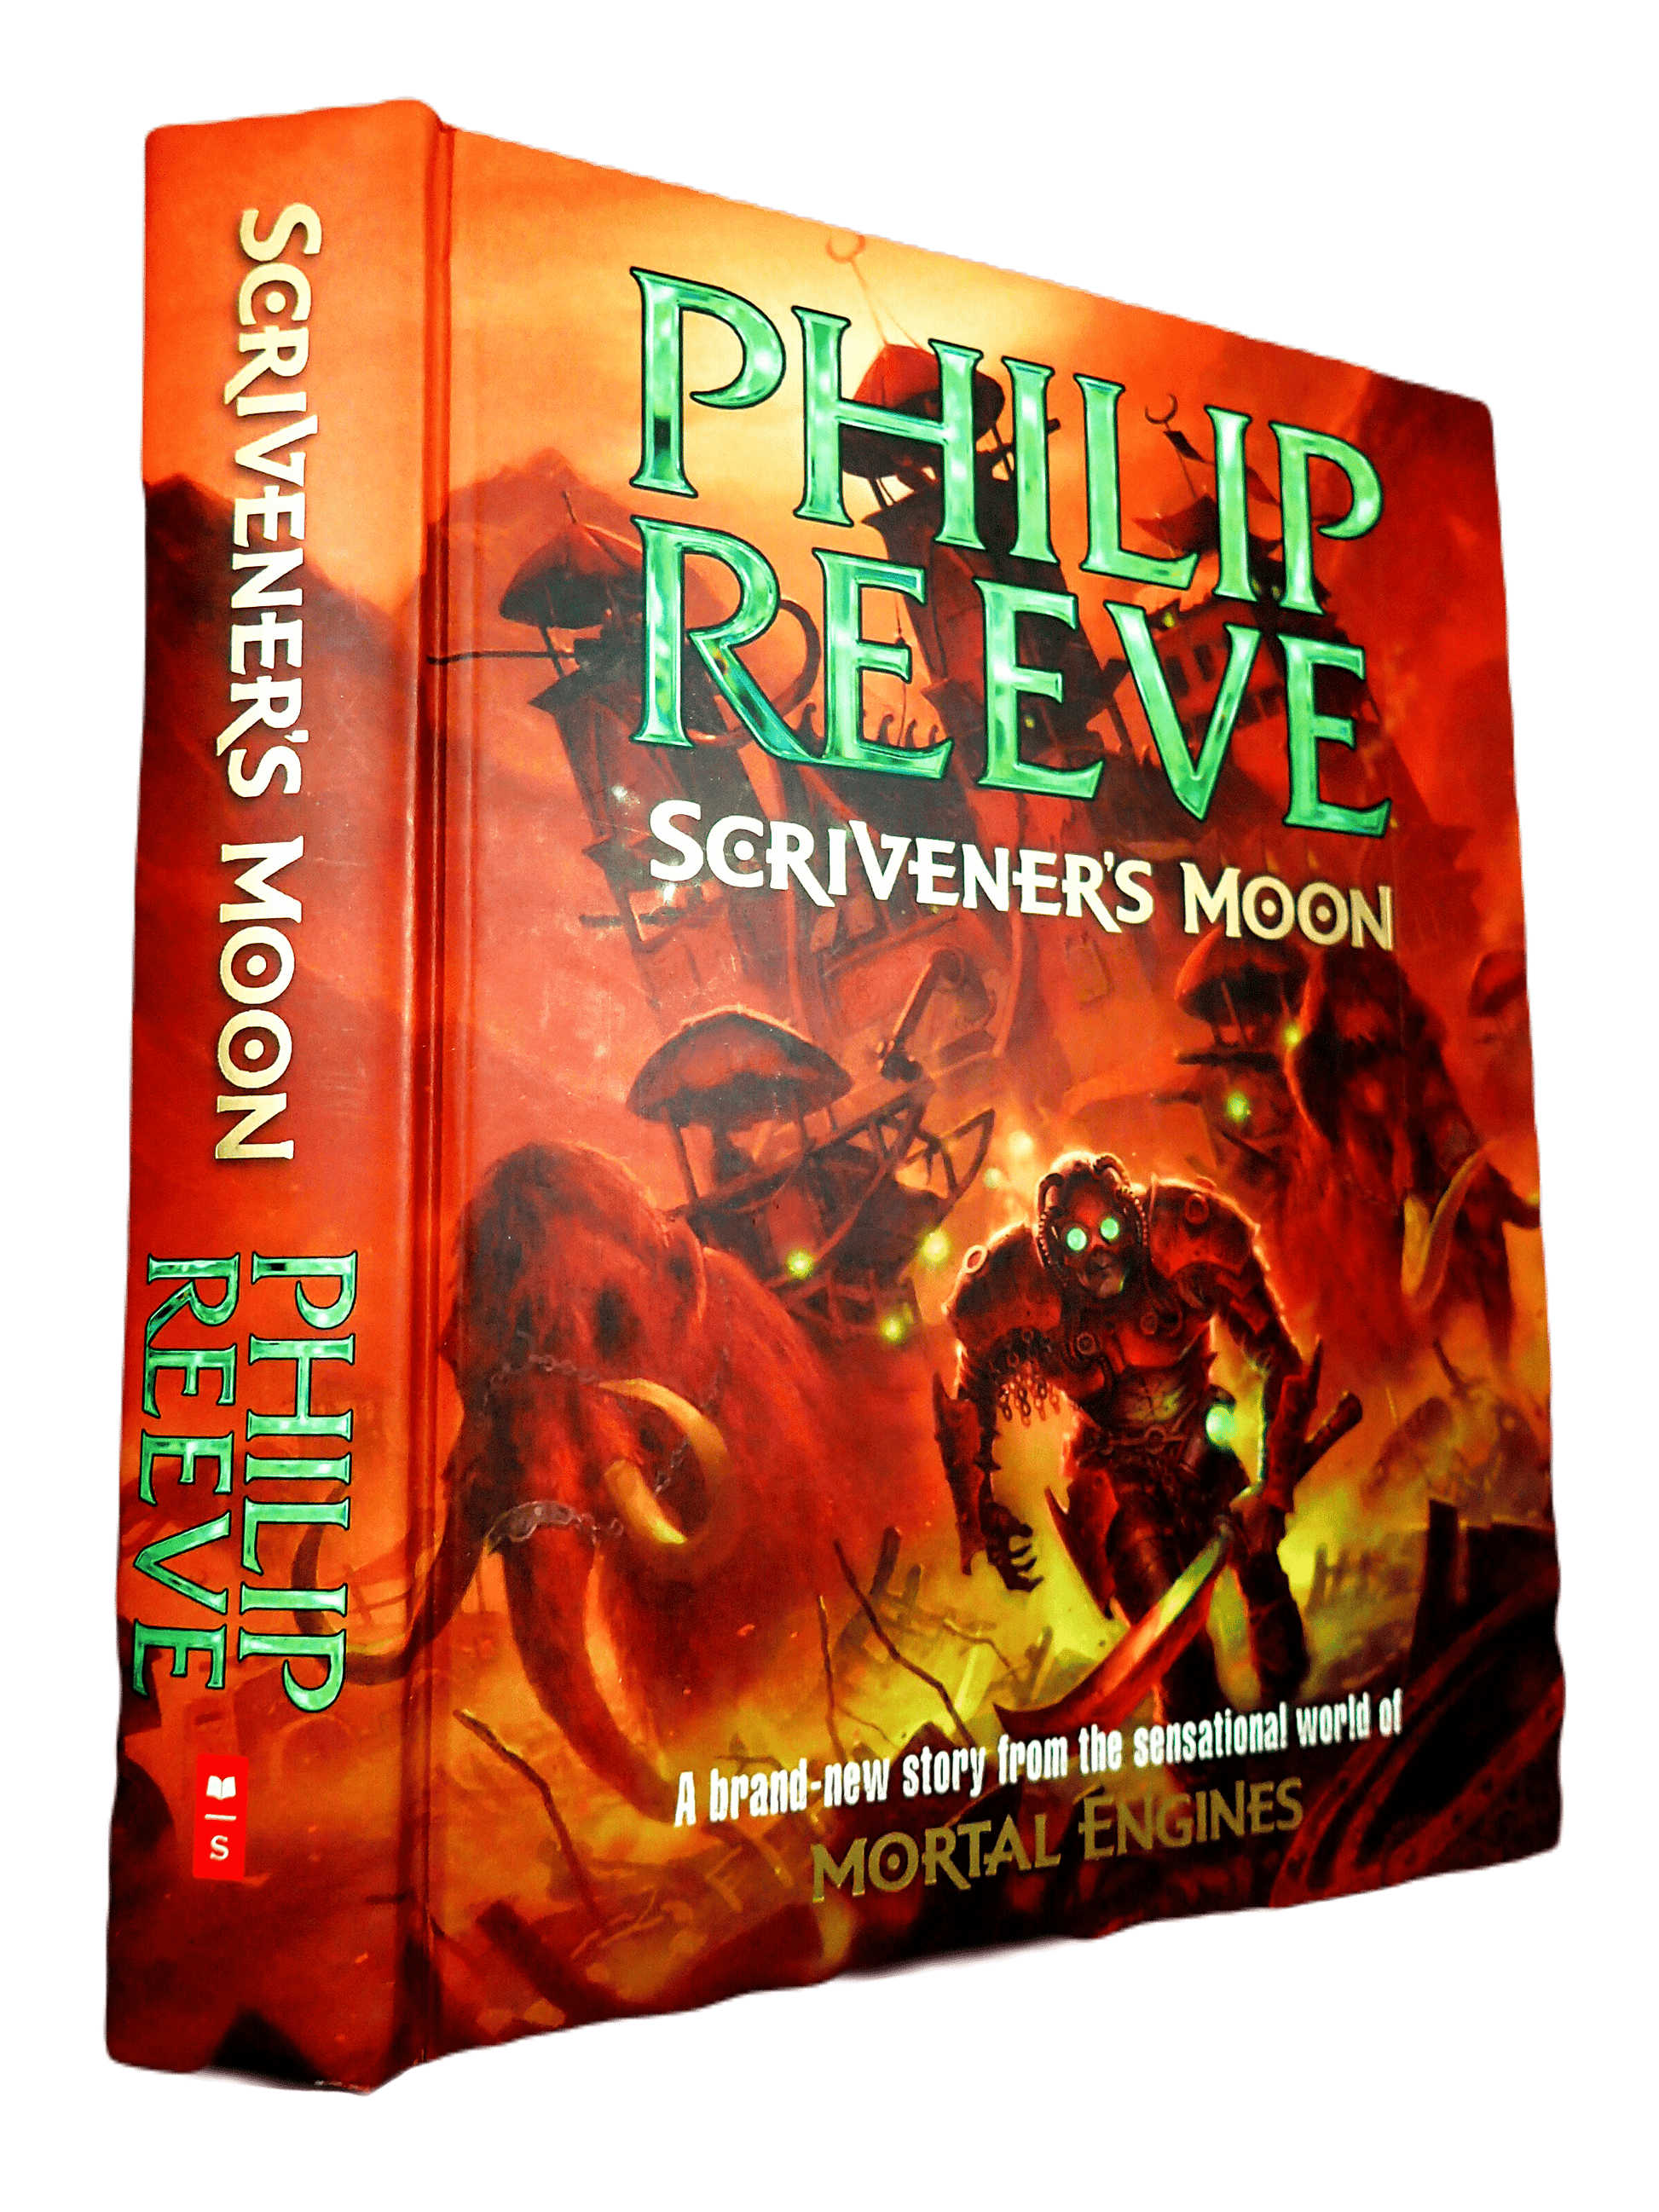 Cover of Scrivener's Moon Philip Reeve Signed book First Edition showing weird figures with glowing eyes and mammoths